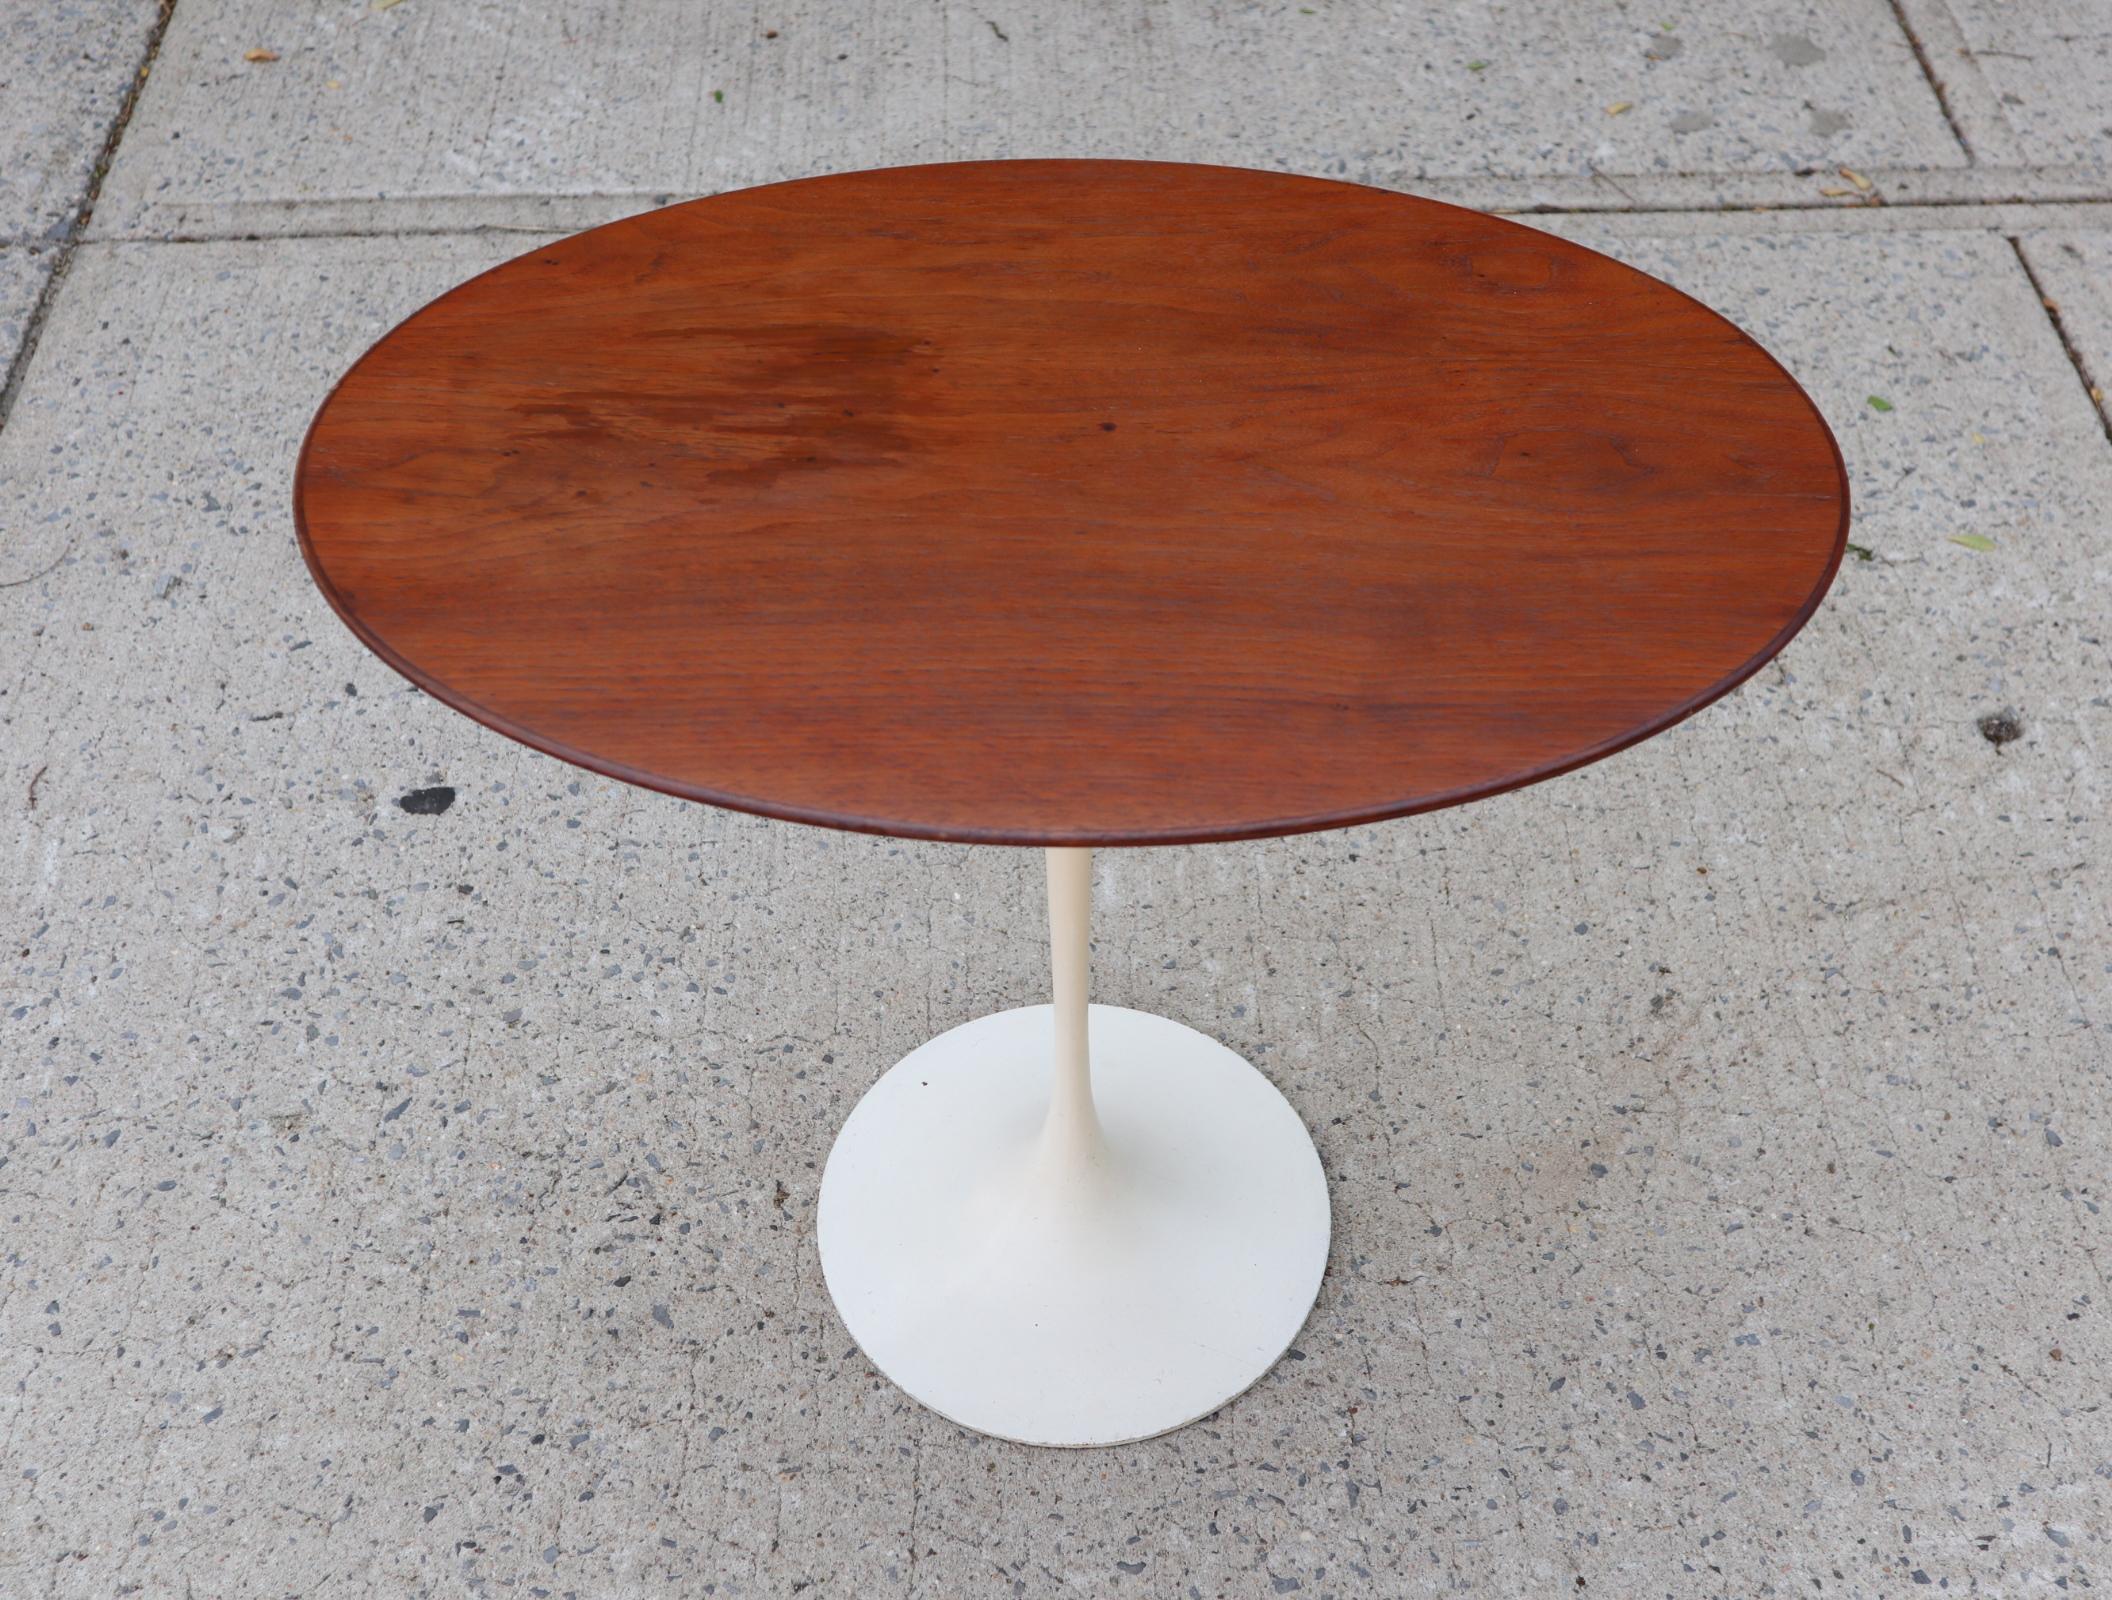 Vintage walnut side table designed by Eero Saarinen for Knoll. Lovey elliptical contours differentiate this design from the more common circular tops. Base with original finish, top has been touched up. Acquired from the original owner who purchased